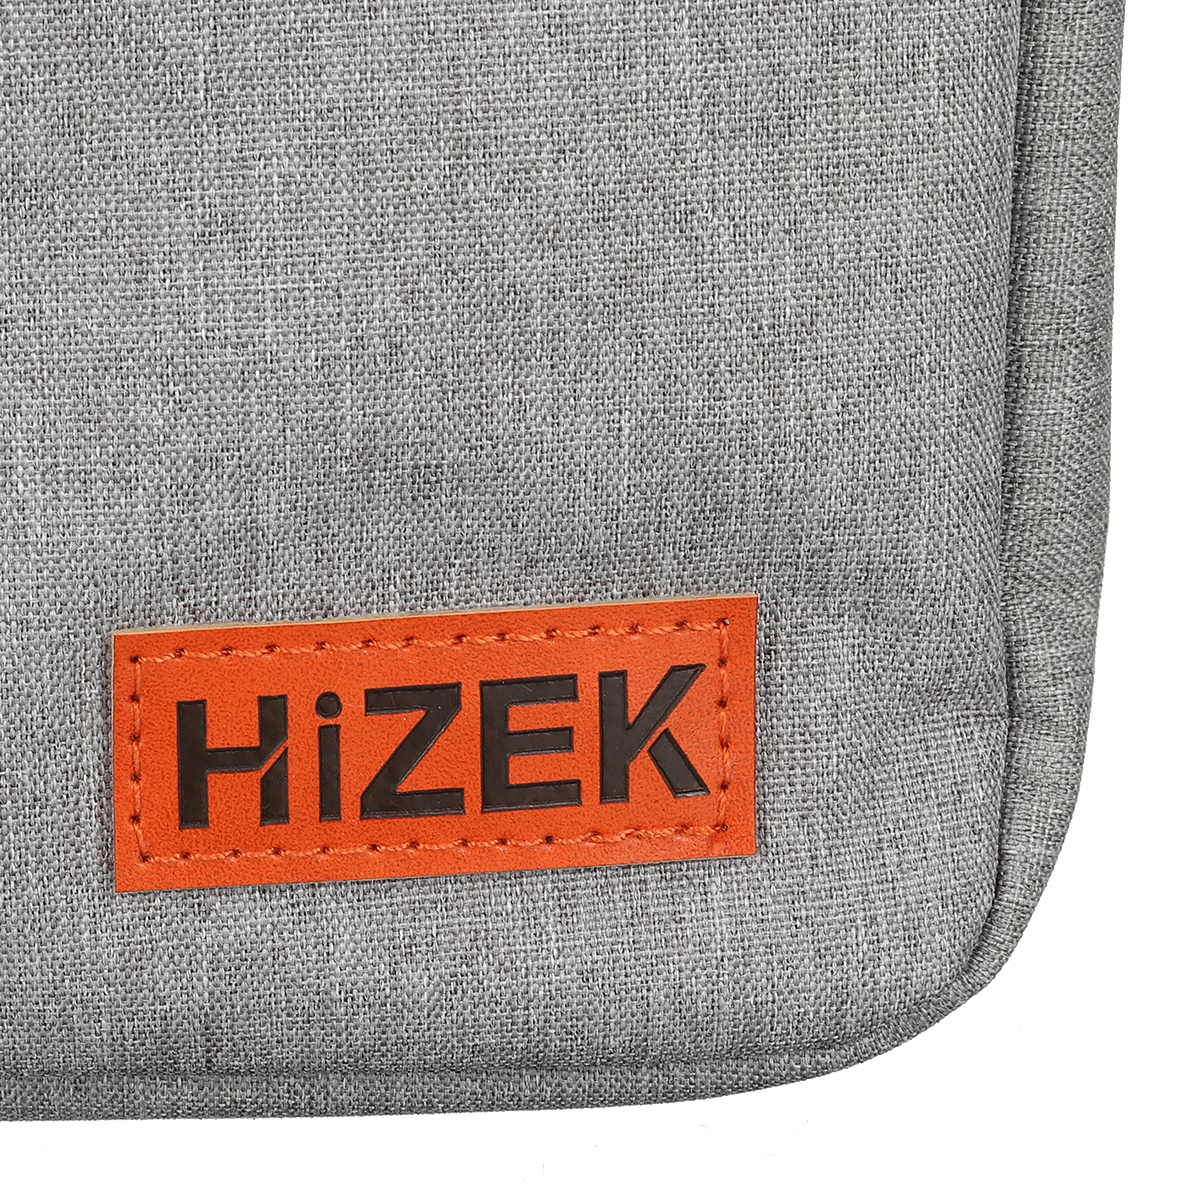 Find Hizek 15/15 6 Laptop bag Waterproof Laptop Sleeve Bag With Handle Zipper Briefcase Carrying Bag for Sale on Gipsybee.com with cryptocurrencies